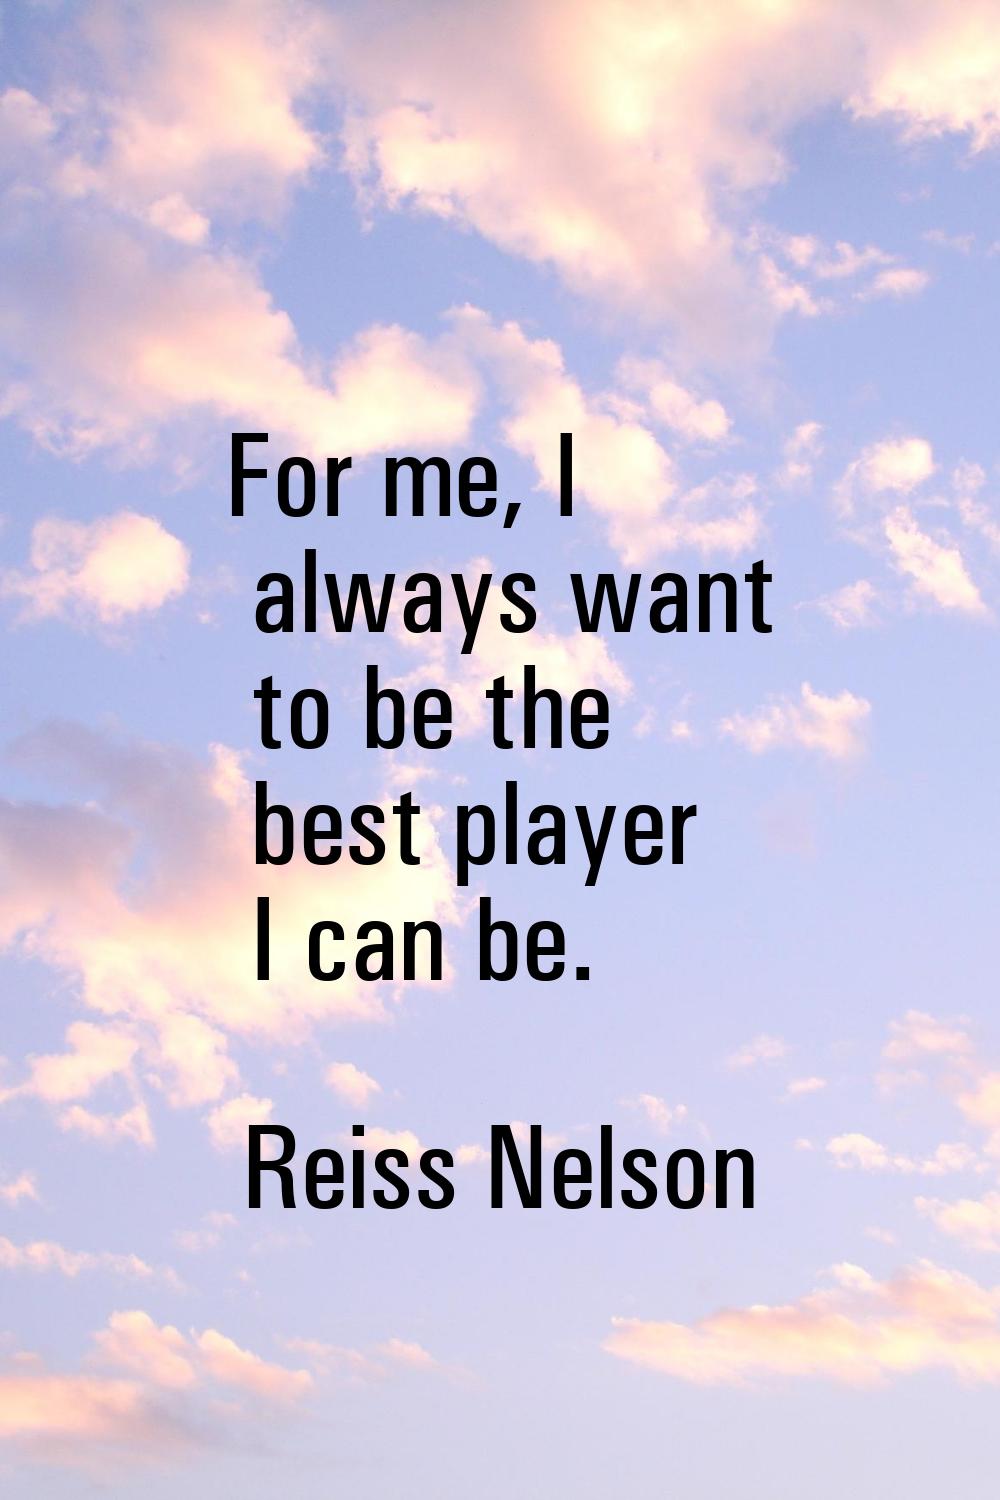 For me, I always want to be the best player I can be.